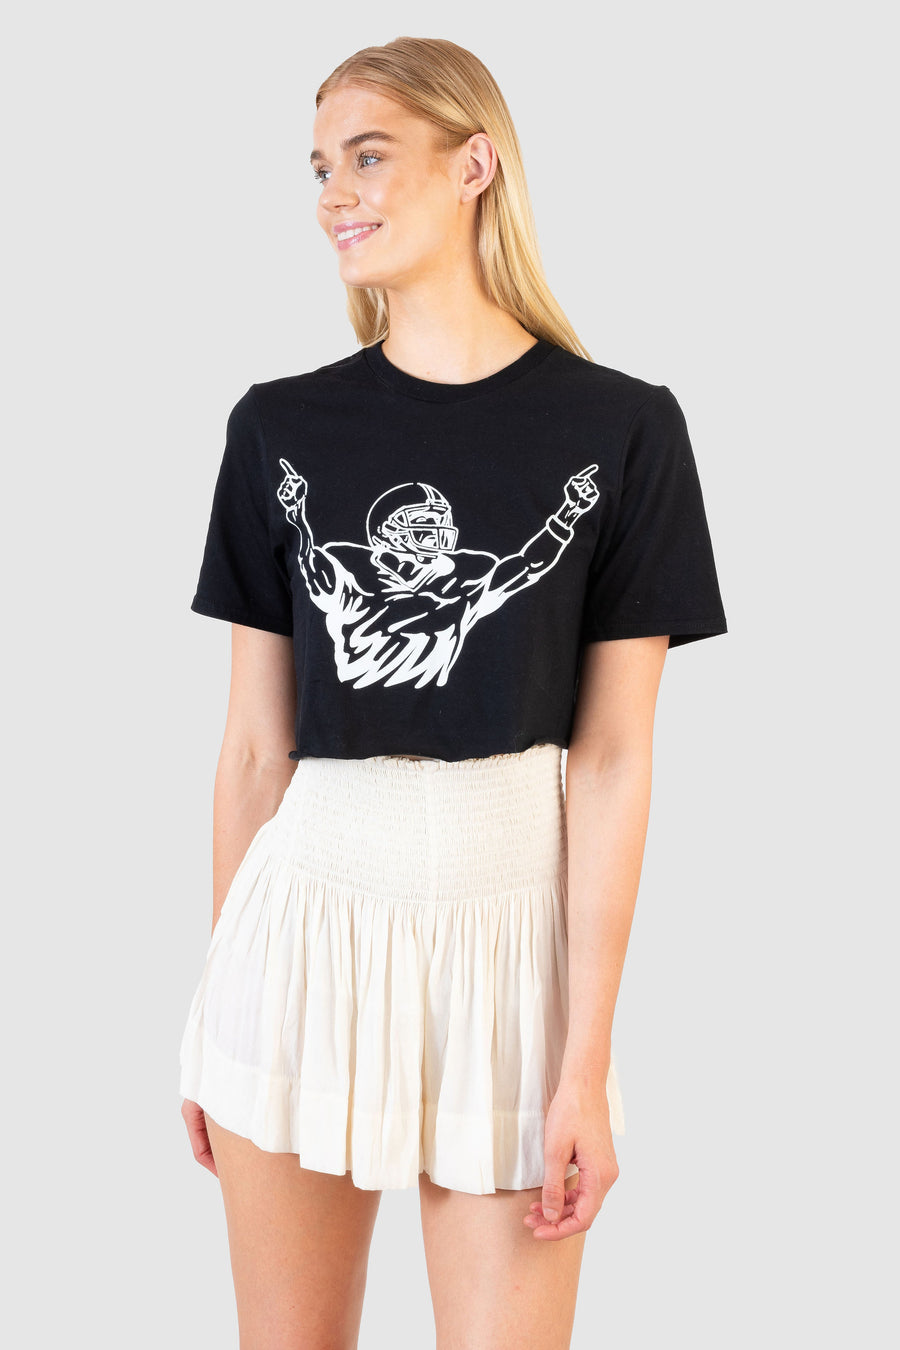 Cropped Tee Football Player *Limited*Edition*